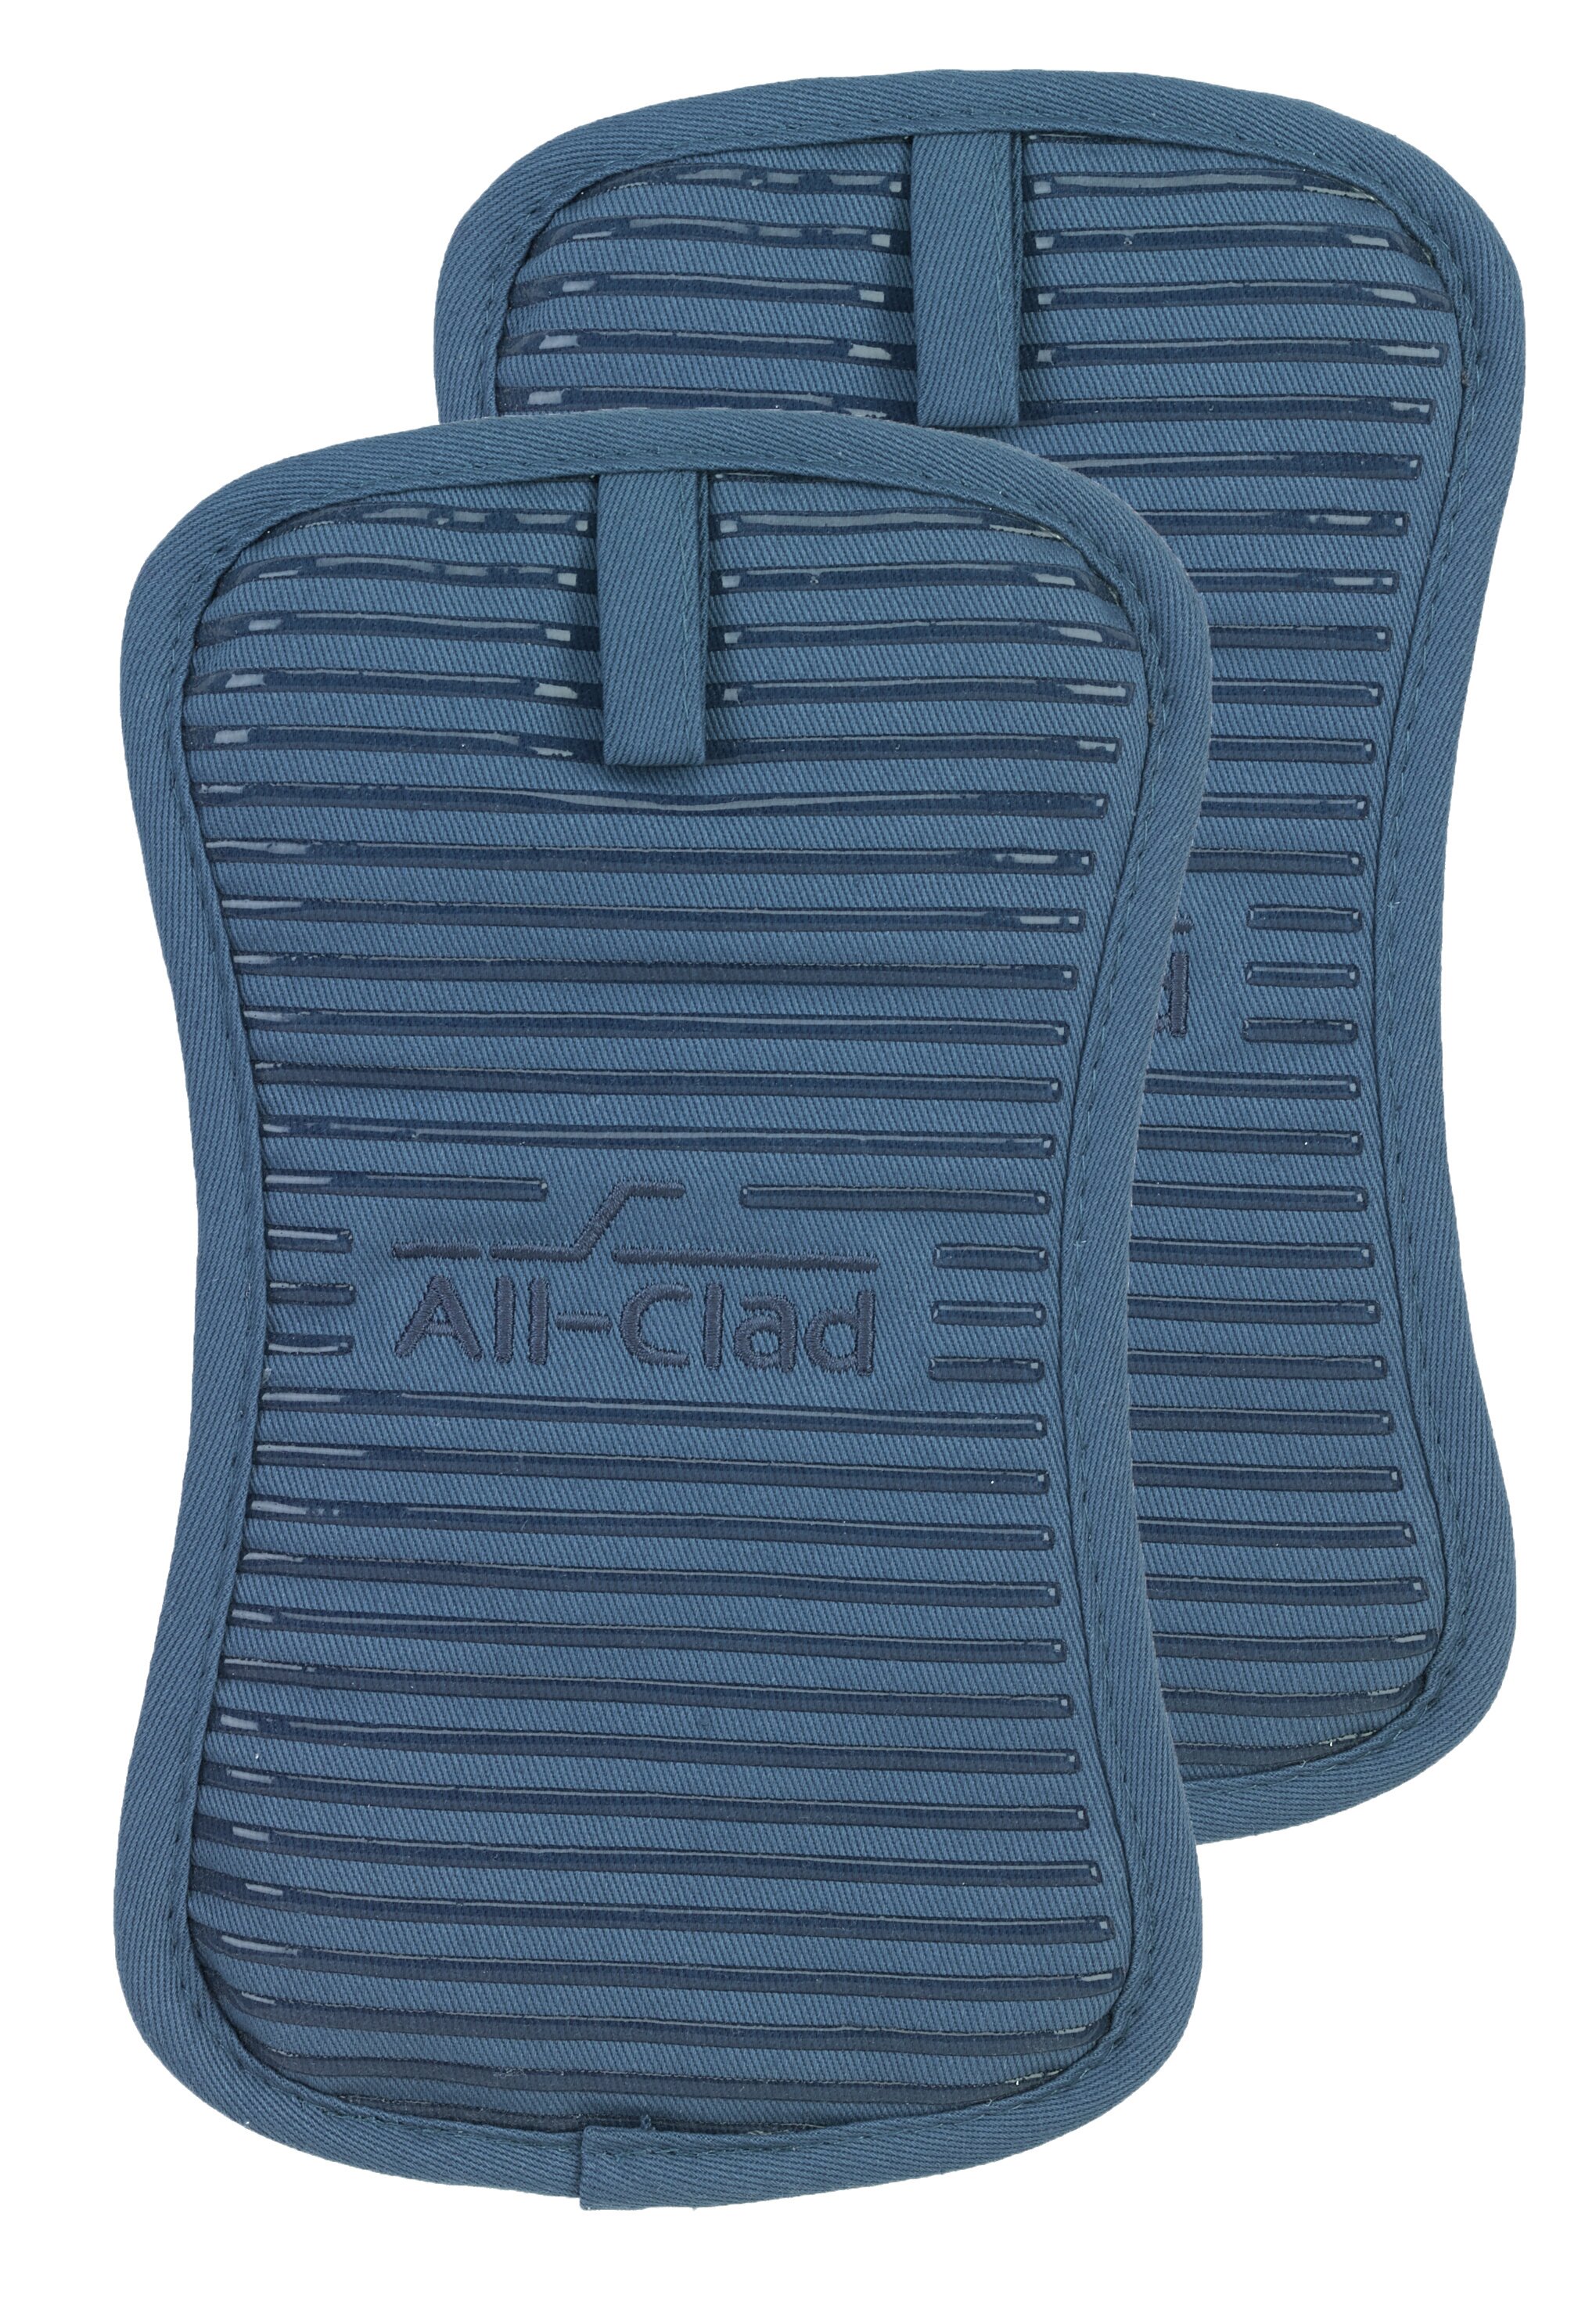 All-Clad Textiles PAC2SPH22 Pot Holder, 2 Pack, Chili